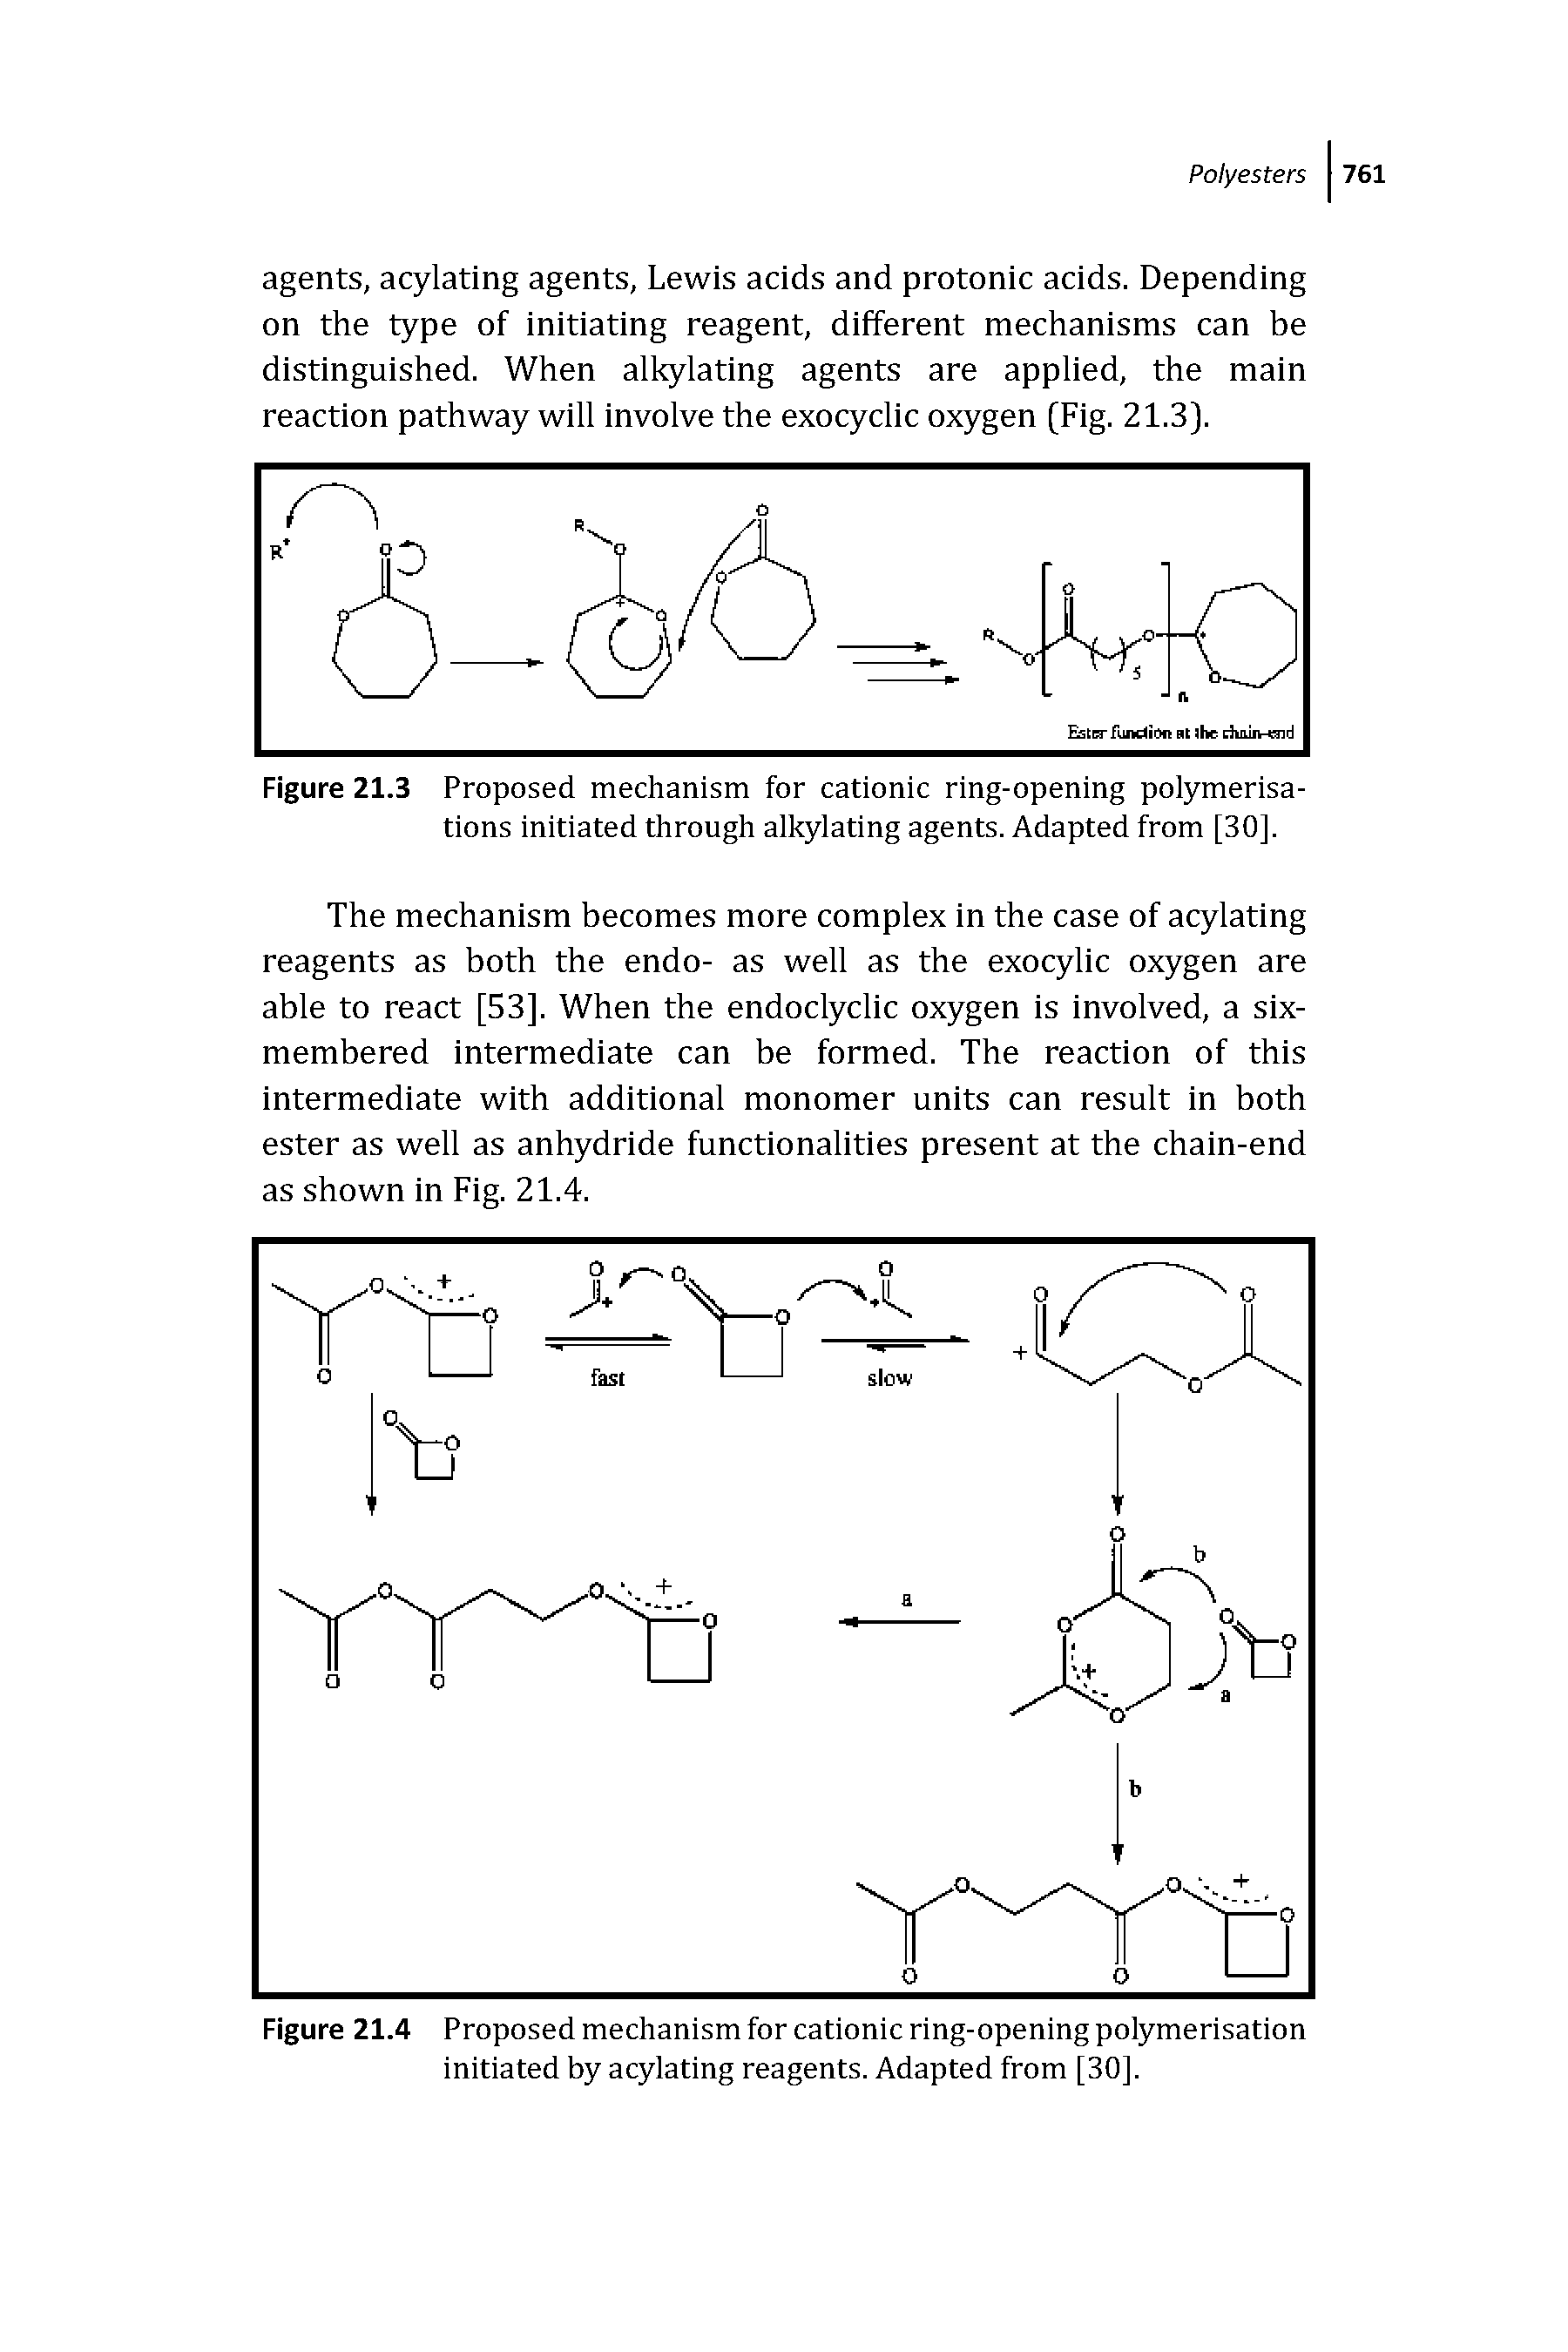 Figure 21.3 Proposed mechanism for cationic ring-opening polymerisations initiated through alkylating agents. Adapted from [30].